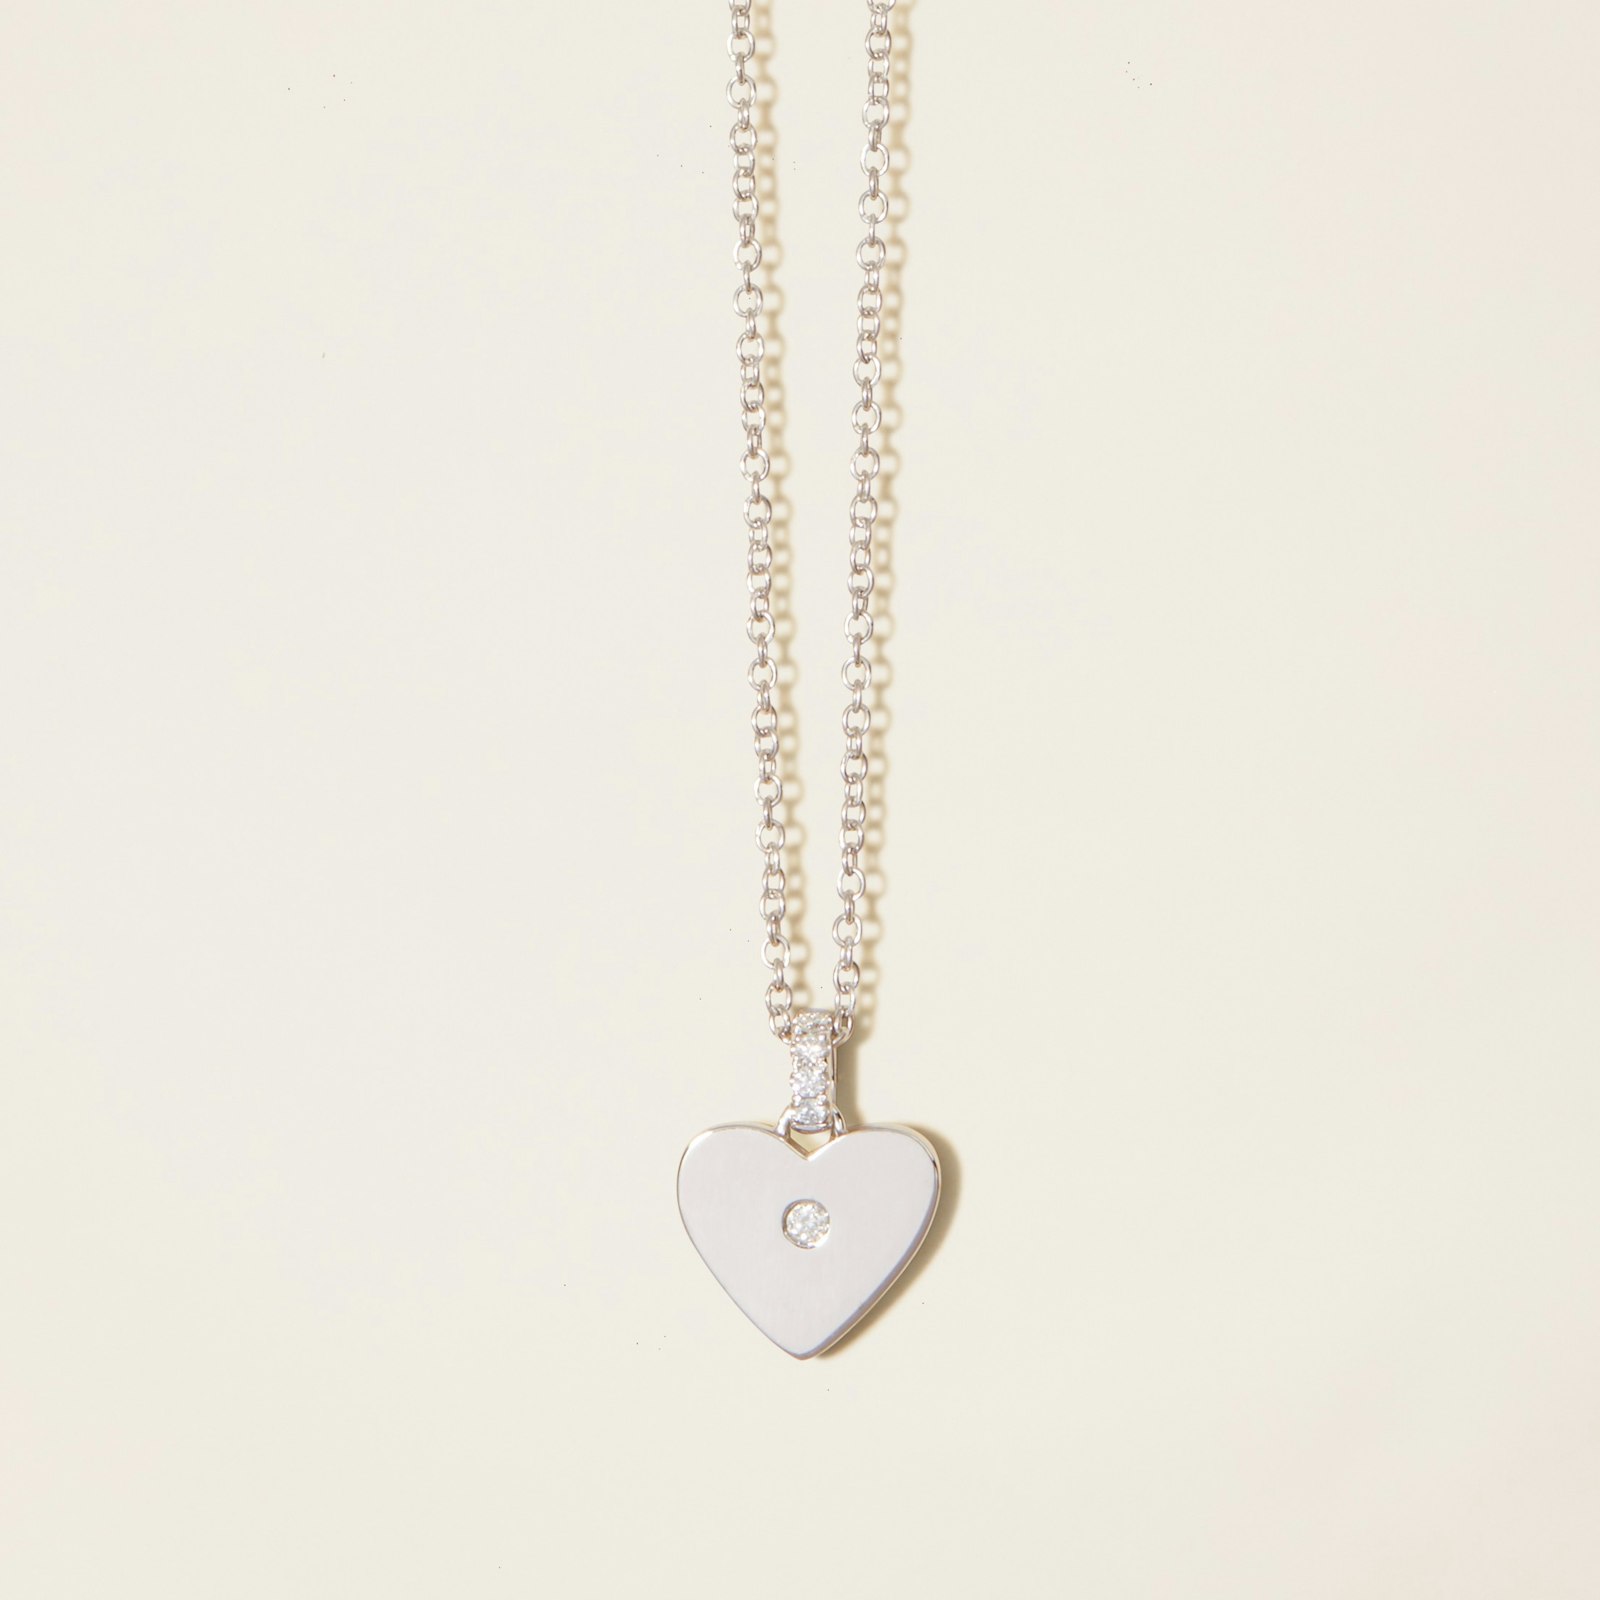 Adore Diamond Heart Necklace_White Gold_Jewelry_Product_1x1_0098.jpg